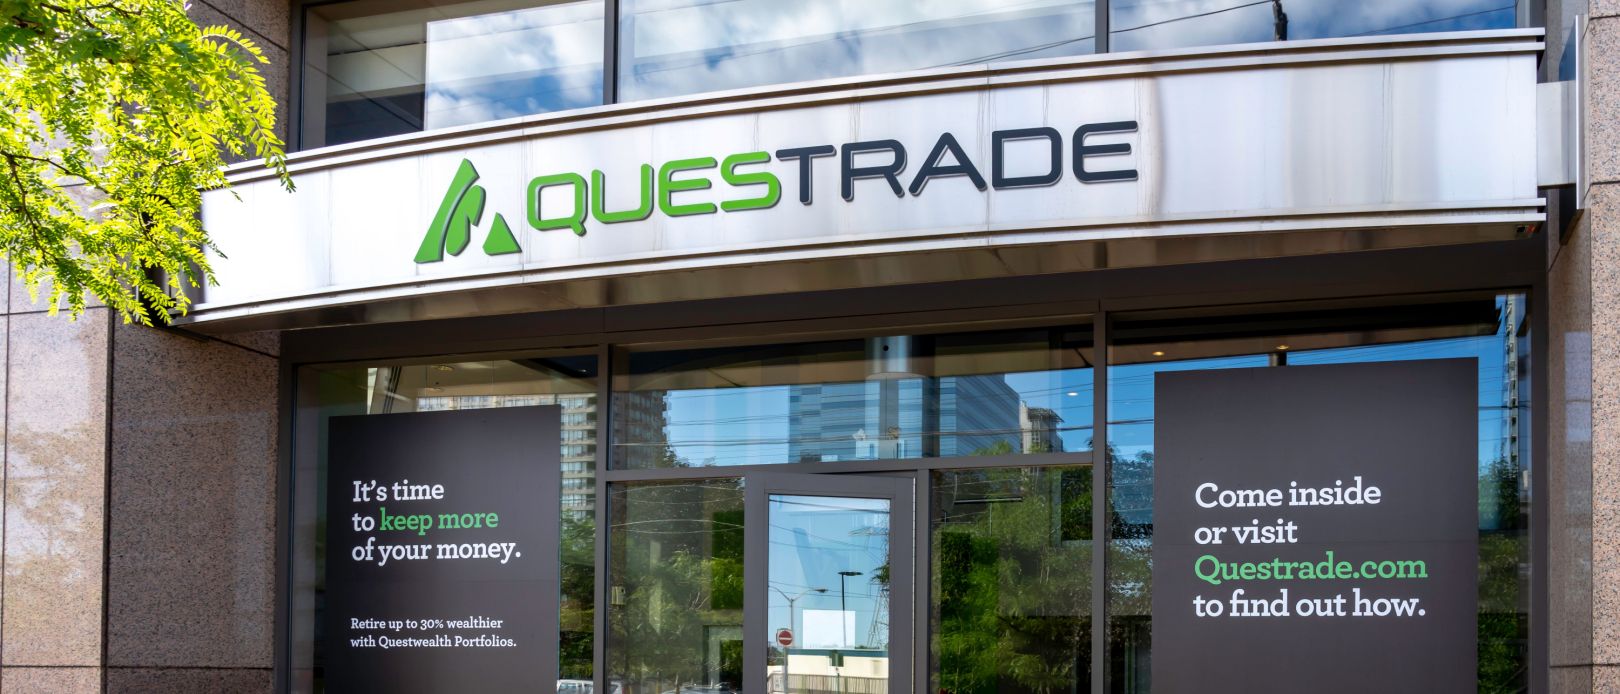 Toronto, Ontario, Canada - July 31, 2019: Questrade office entrance in Toronto, Canada. Questrade, Inc. provides online brokerage and stock trading services to independent investors in Canada.